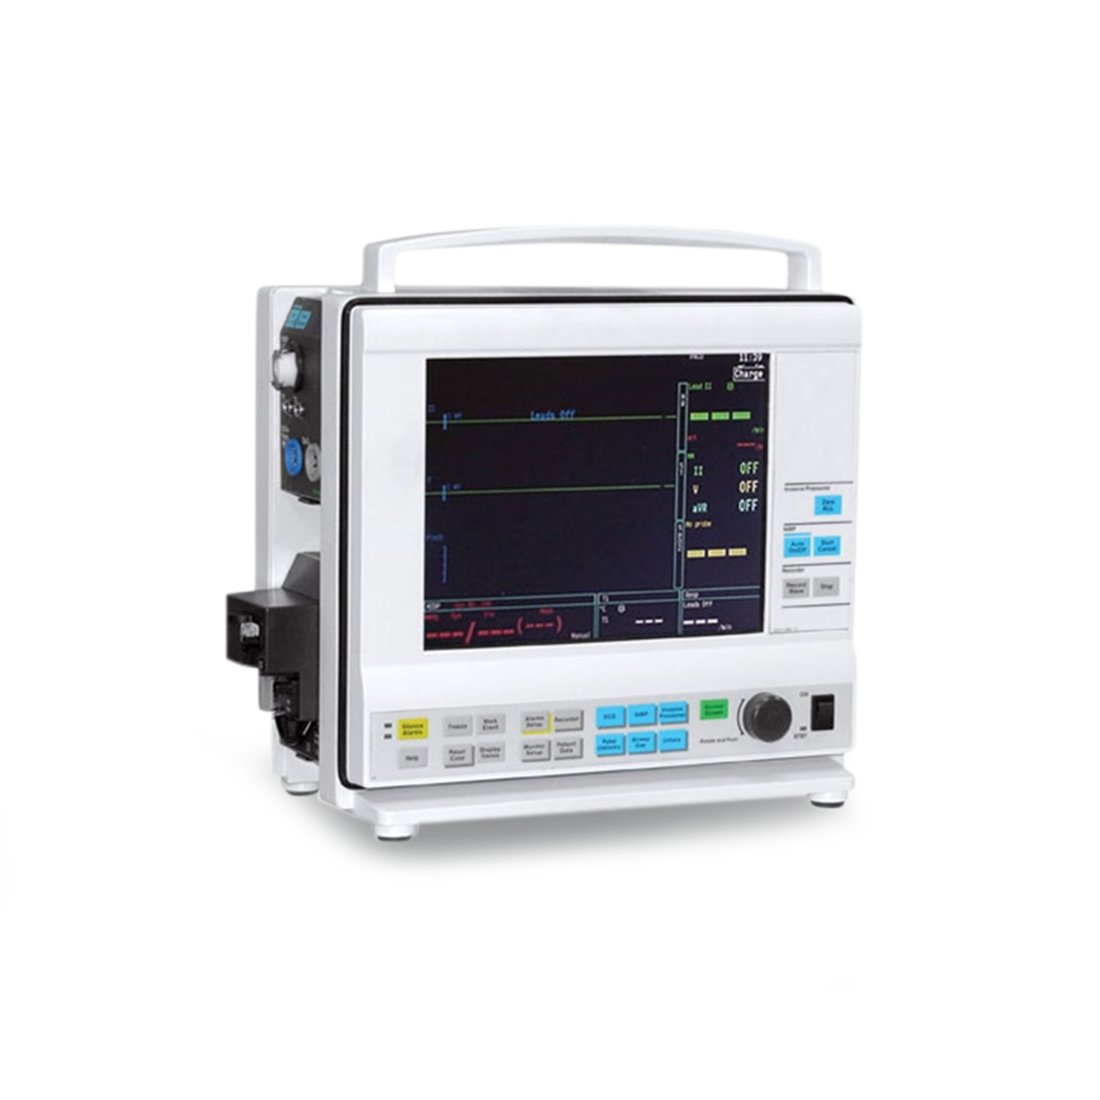 GE AS/3 Compact Patient Monitor